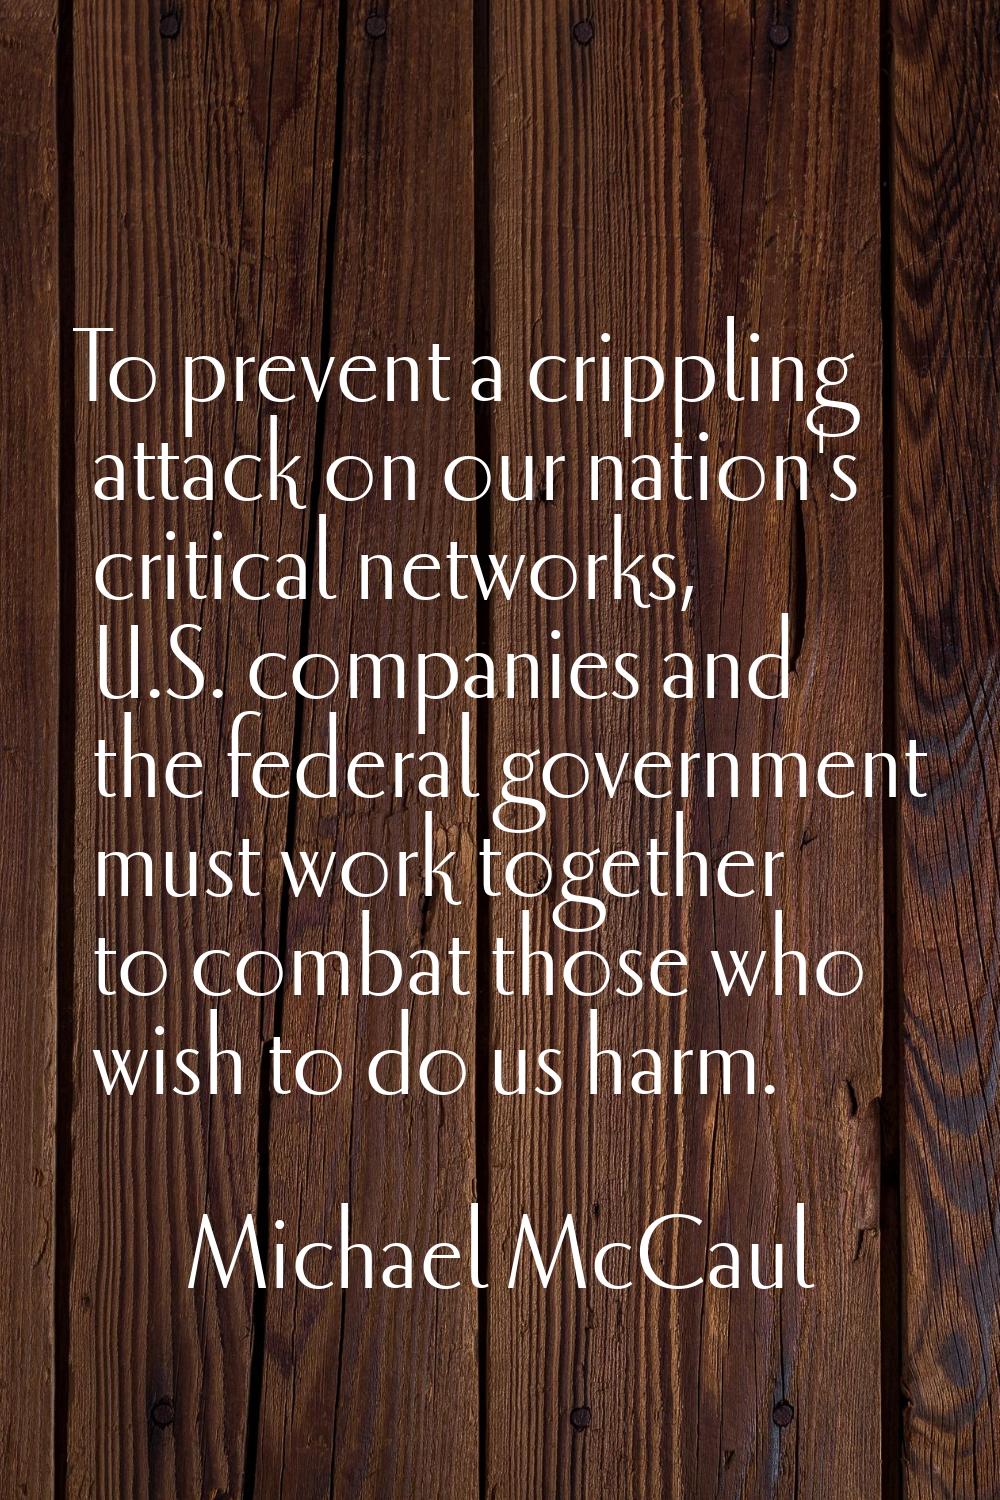 To prevent a crippling attack on our nation's critical networks, U.S. companies and the federal gov